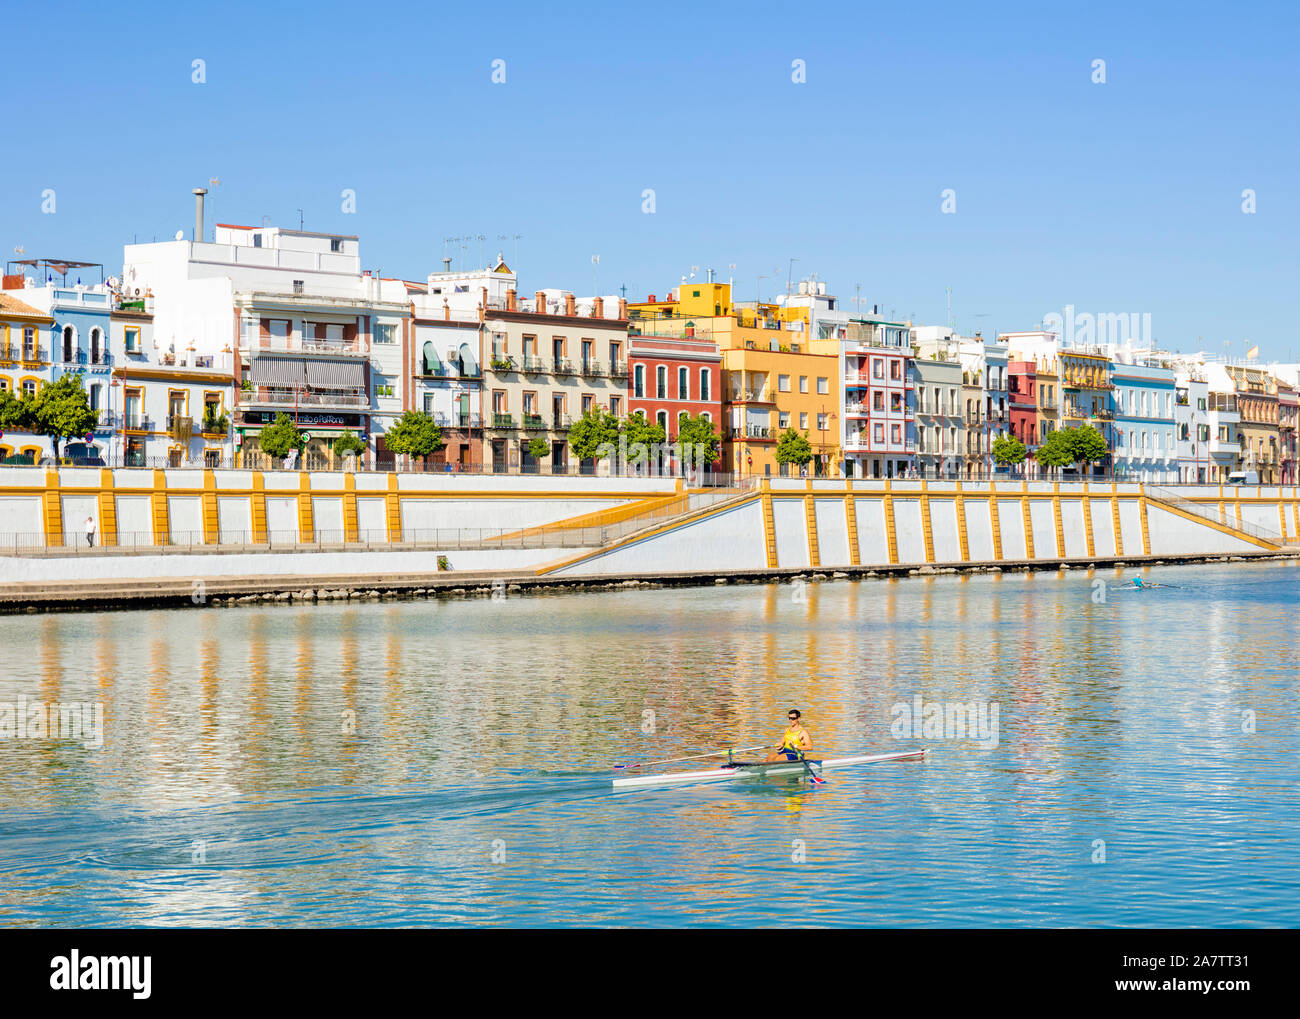 Coloured houses along the Triana banks of the Guadalquivir river with a rower Sevilla Seville Spain seville Andalusia Spain EU Europe Stock Photo